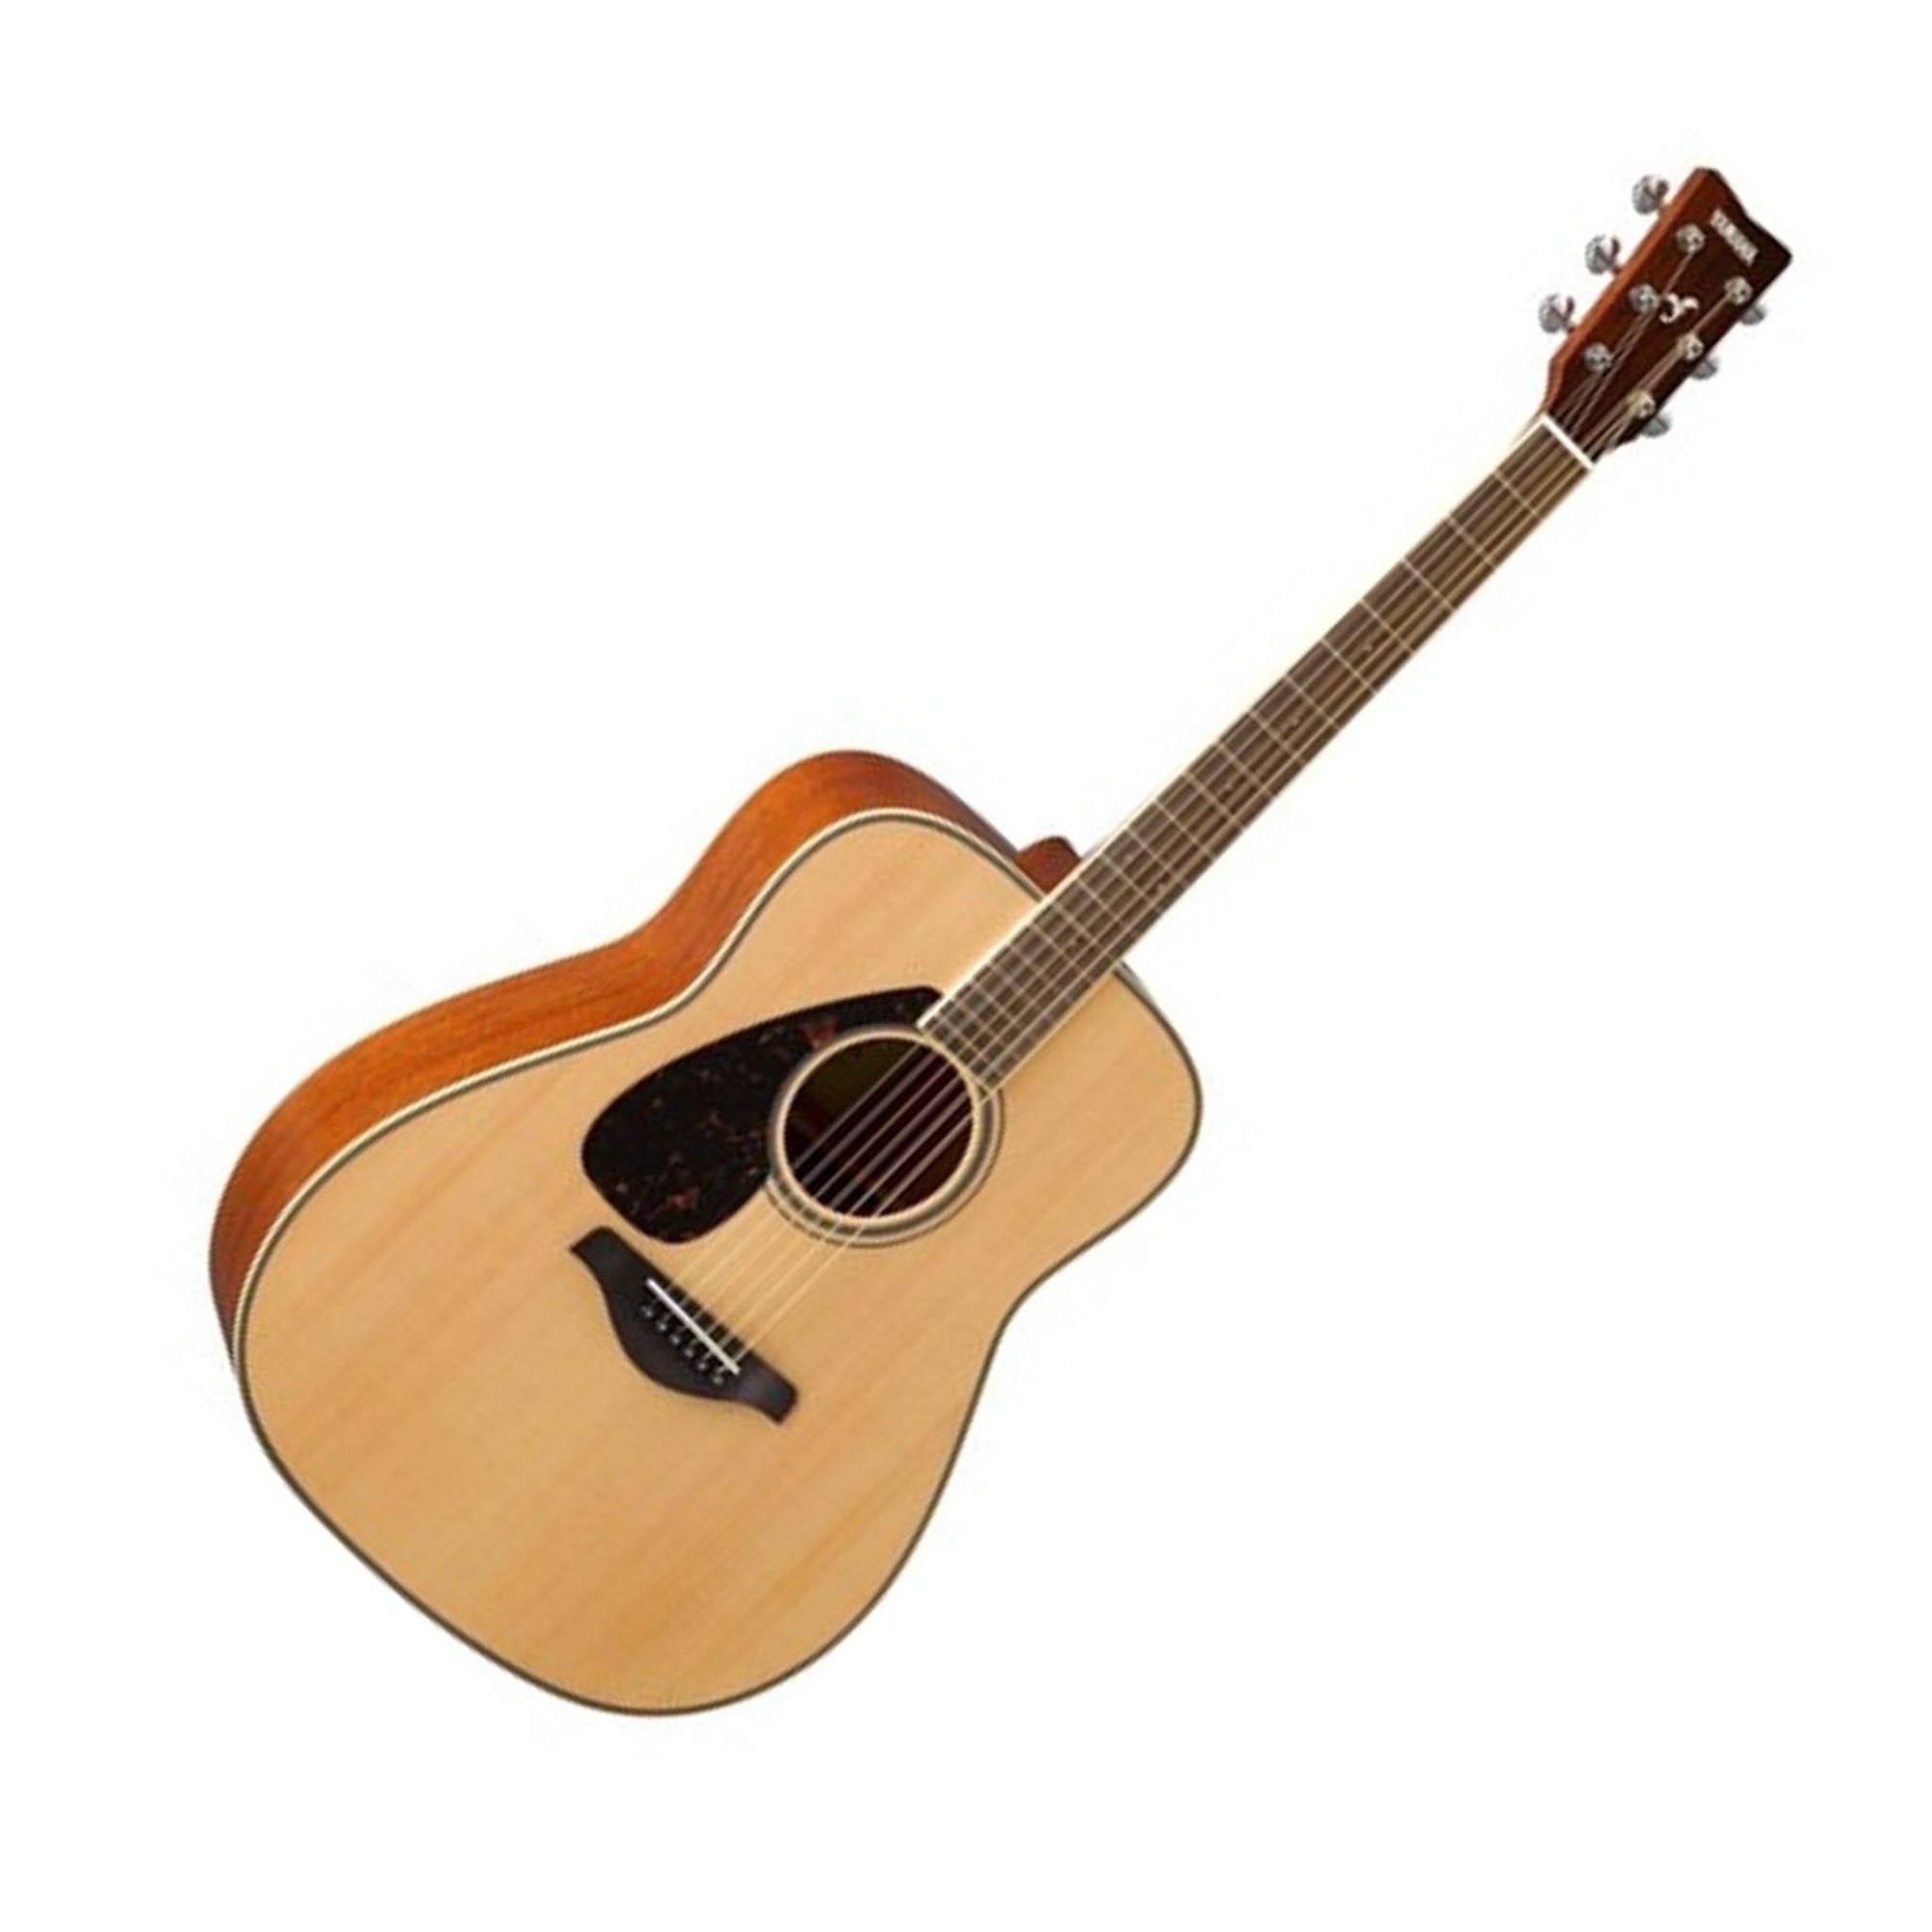 The Yamaha FG820 acoustic steel string guitar combines a solid spruce top with a mahogany back and sides for a full, warm sound and one of Yamaha's most popular acoustic models. 